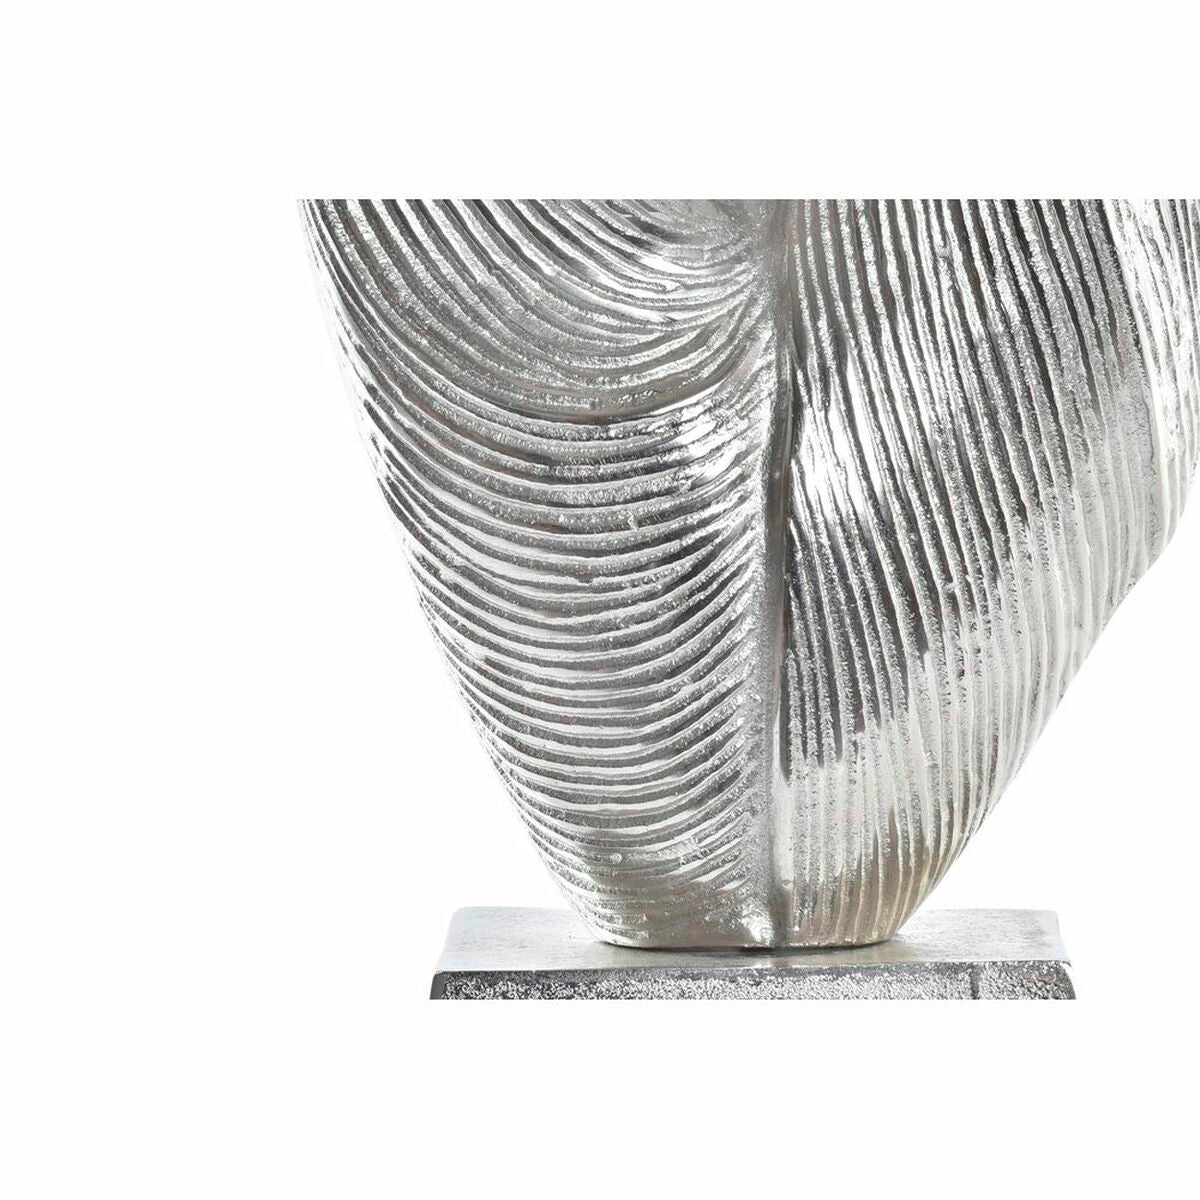 Abstract Silver 20 x 9 x 44 cm